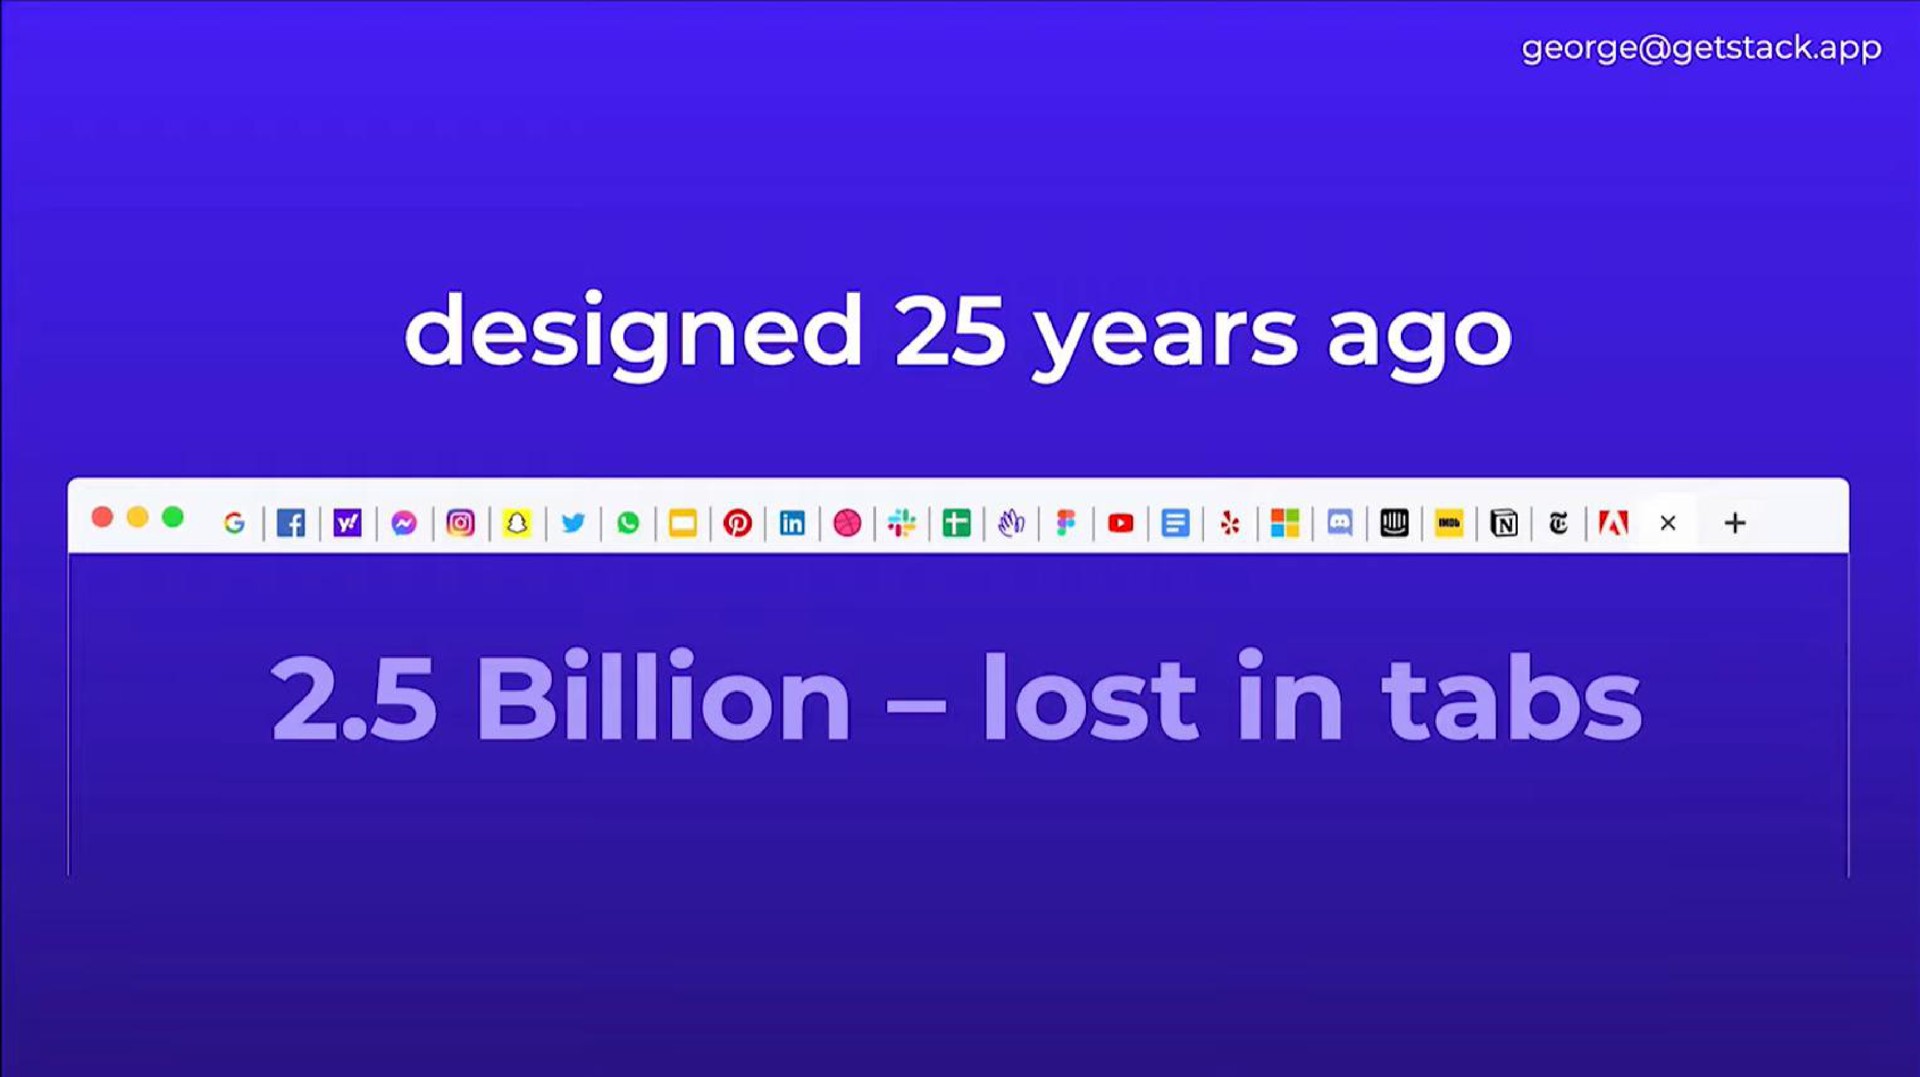 designed years ago billion lost in tabs | Stack.app